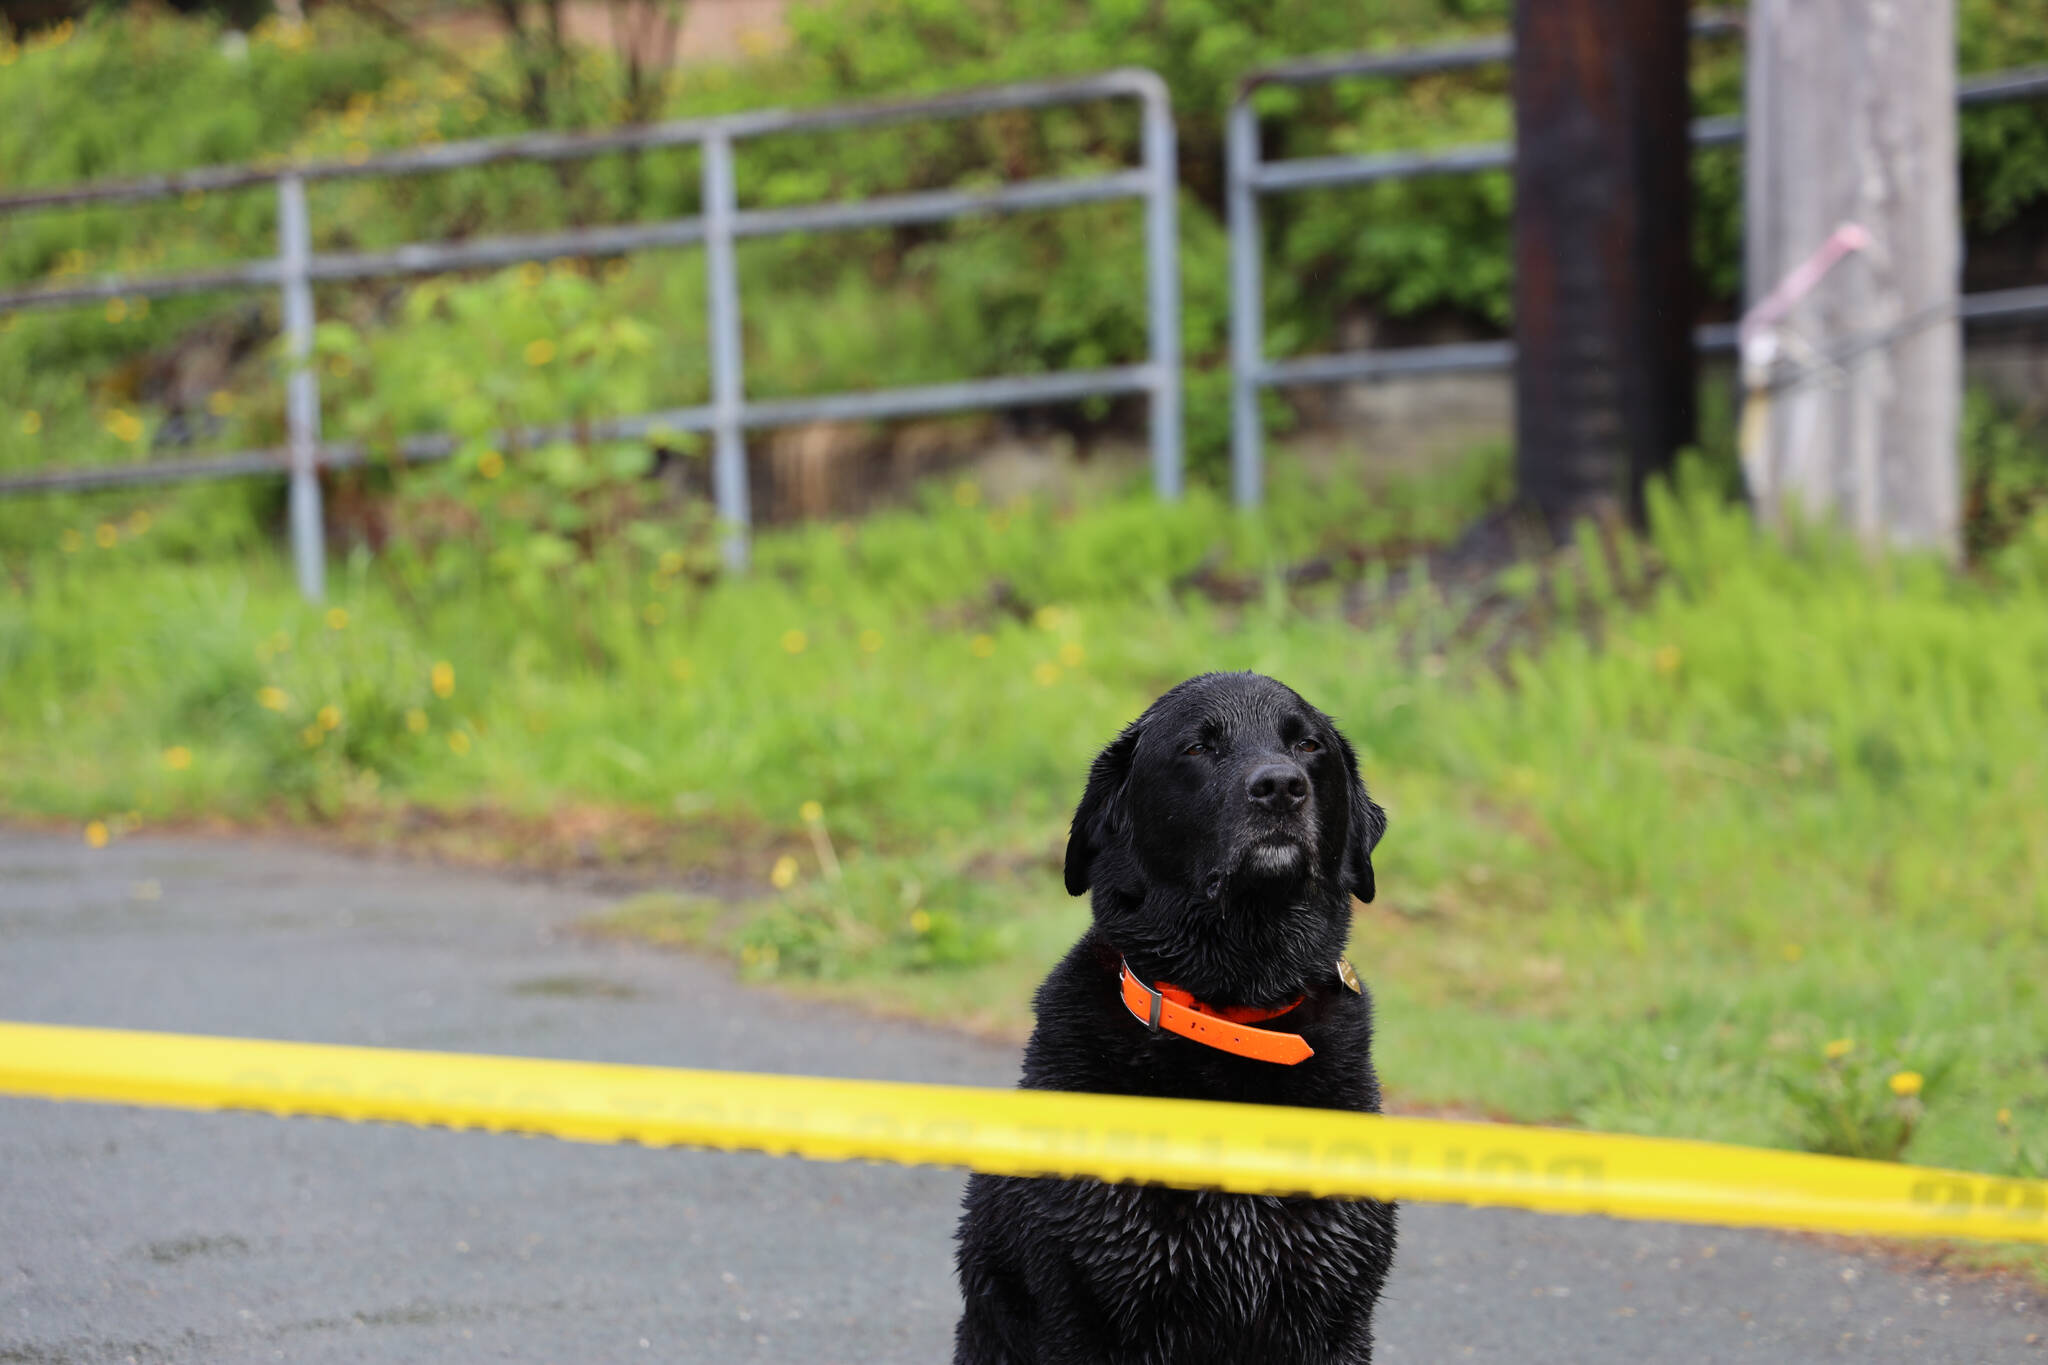 Shadow the dog sits just before the finish line at the Alaska Law Enforcement Torch Run at Twin Lakes Park Saturday morning. (Clarise Larson / Juneau Empire)